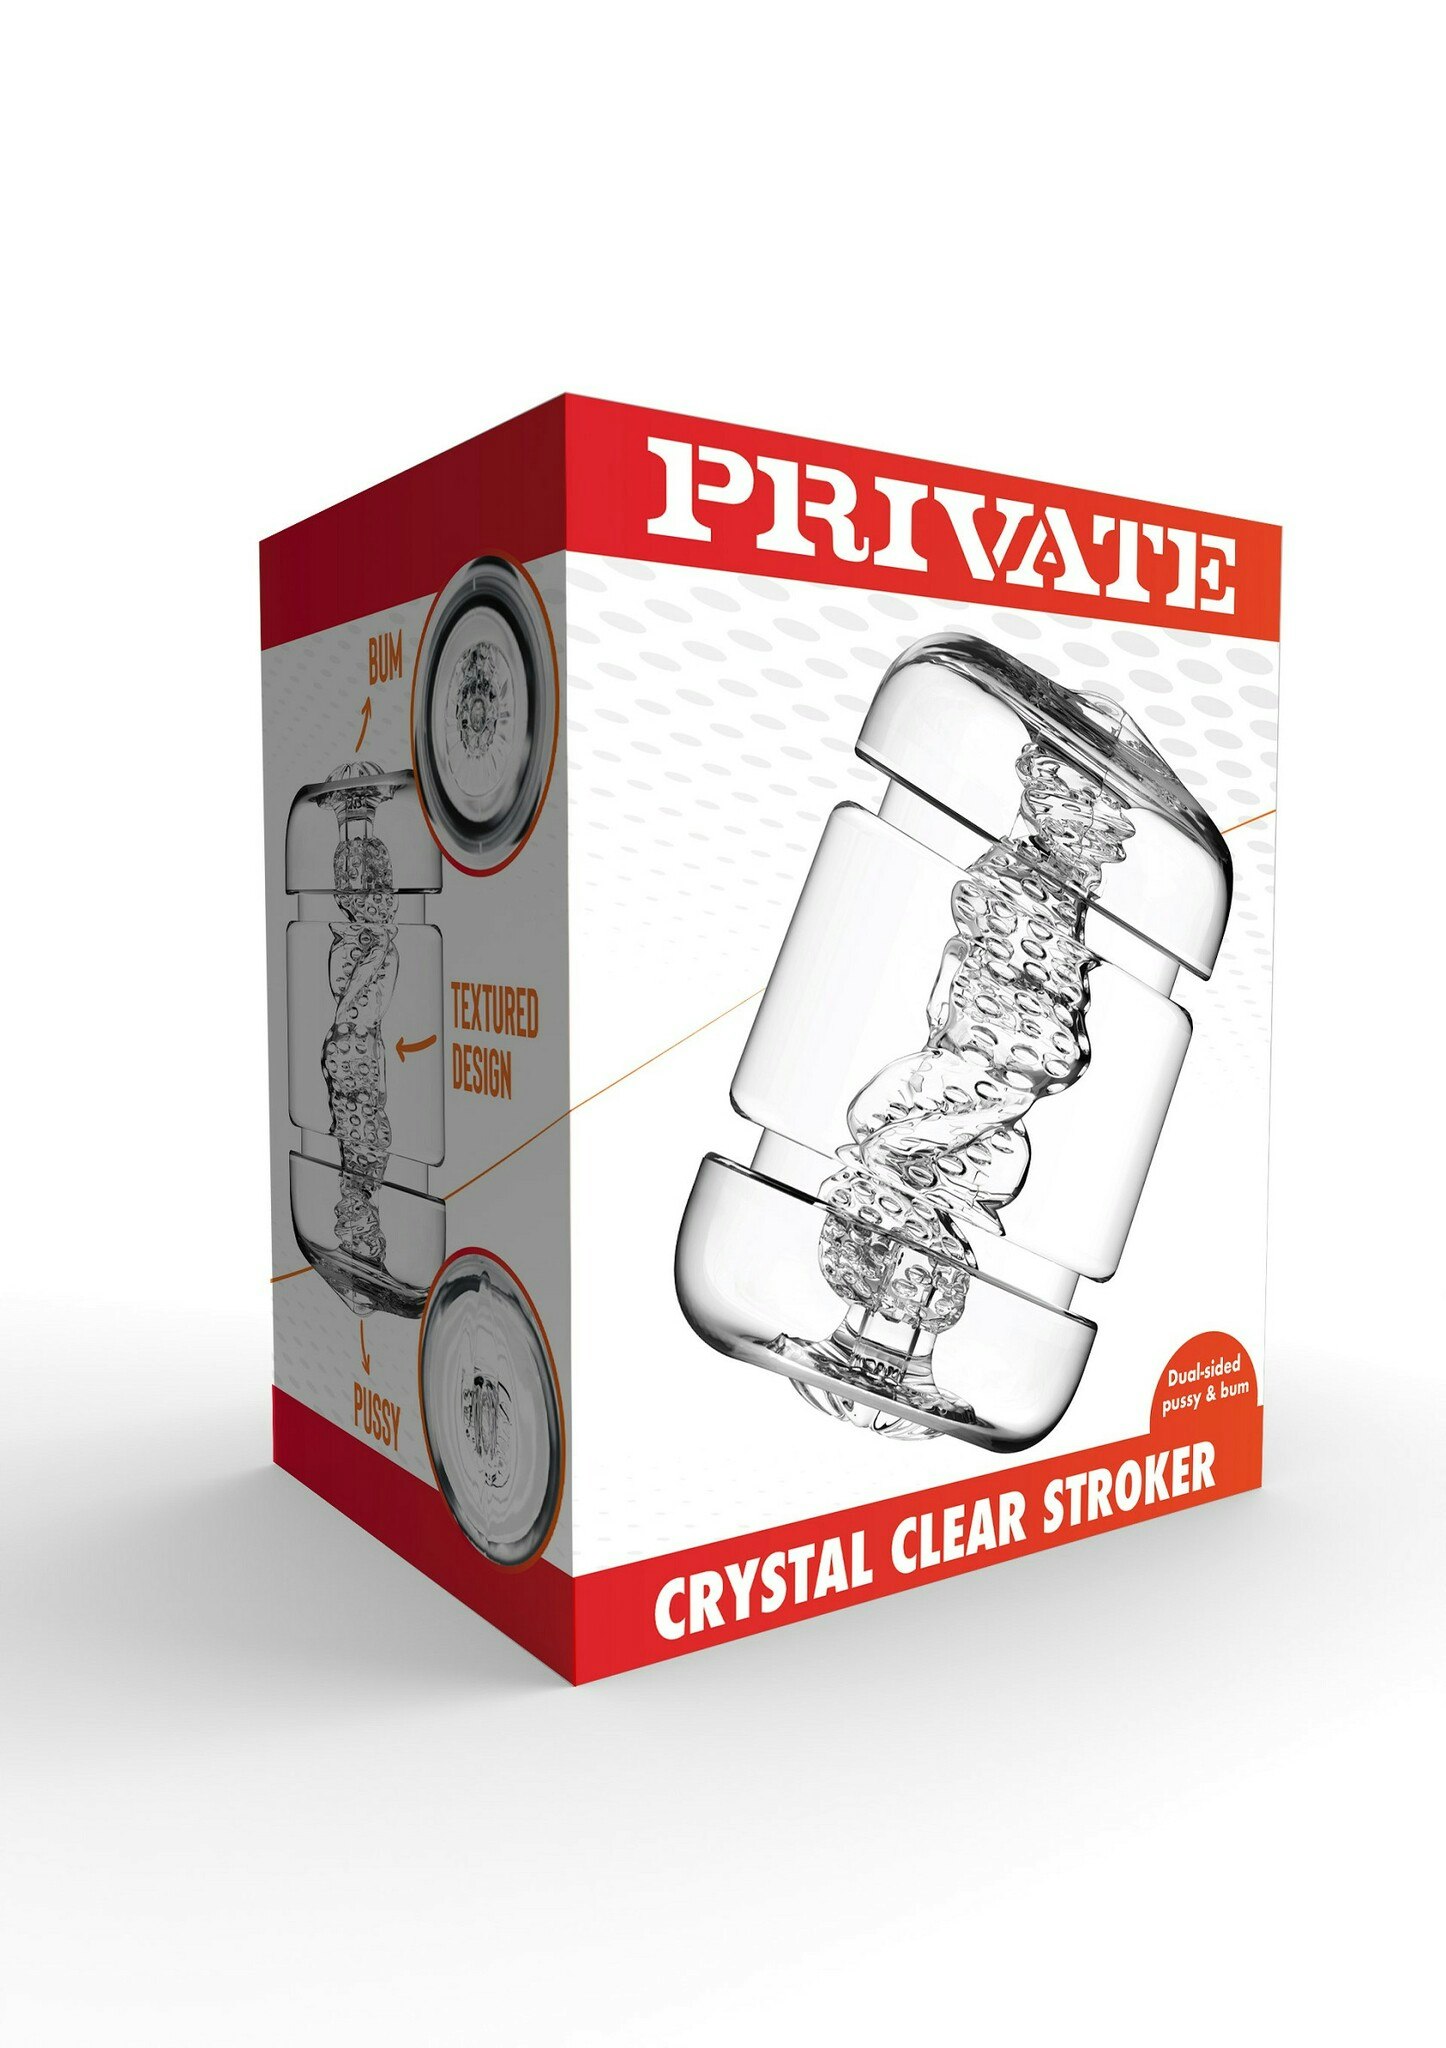 Private Clear - Crystal Clear Pussy & Bum